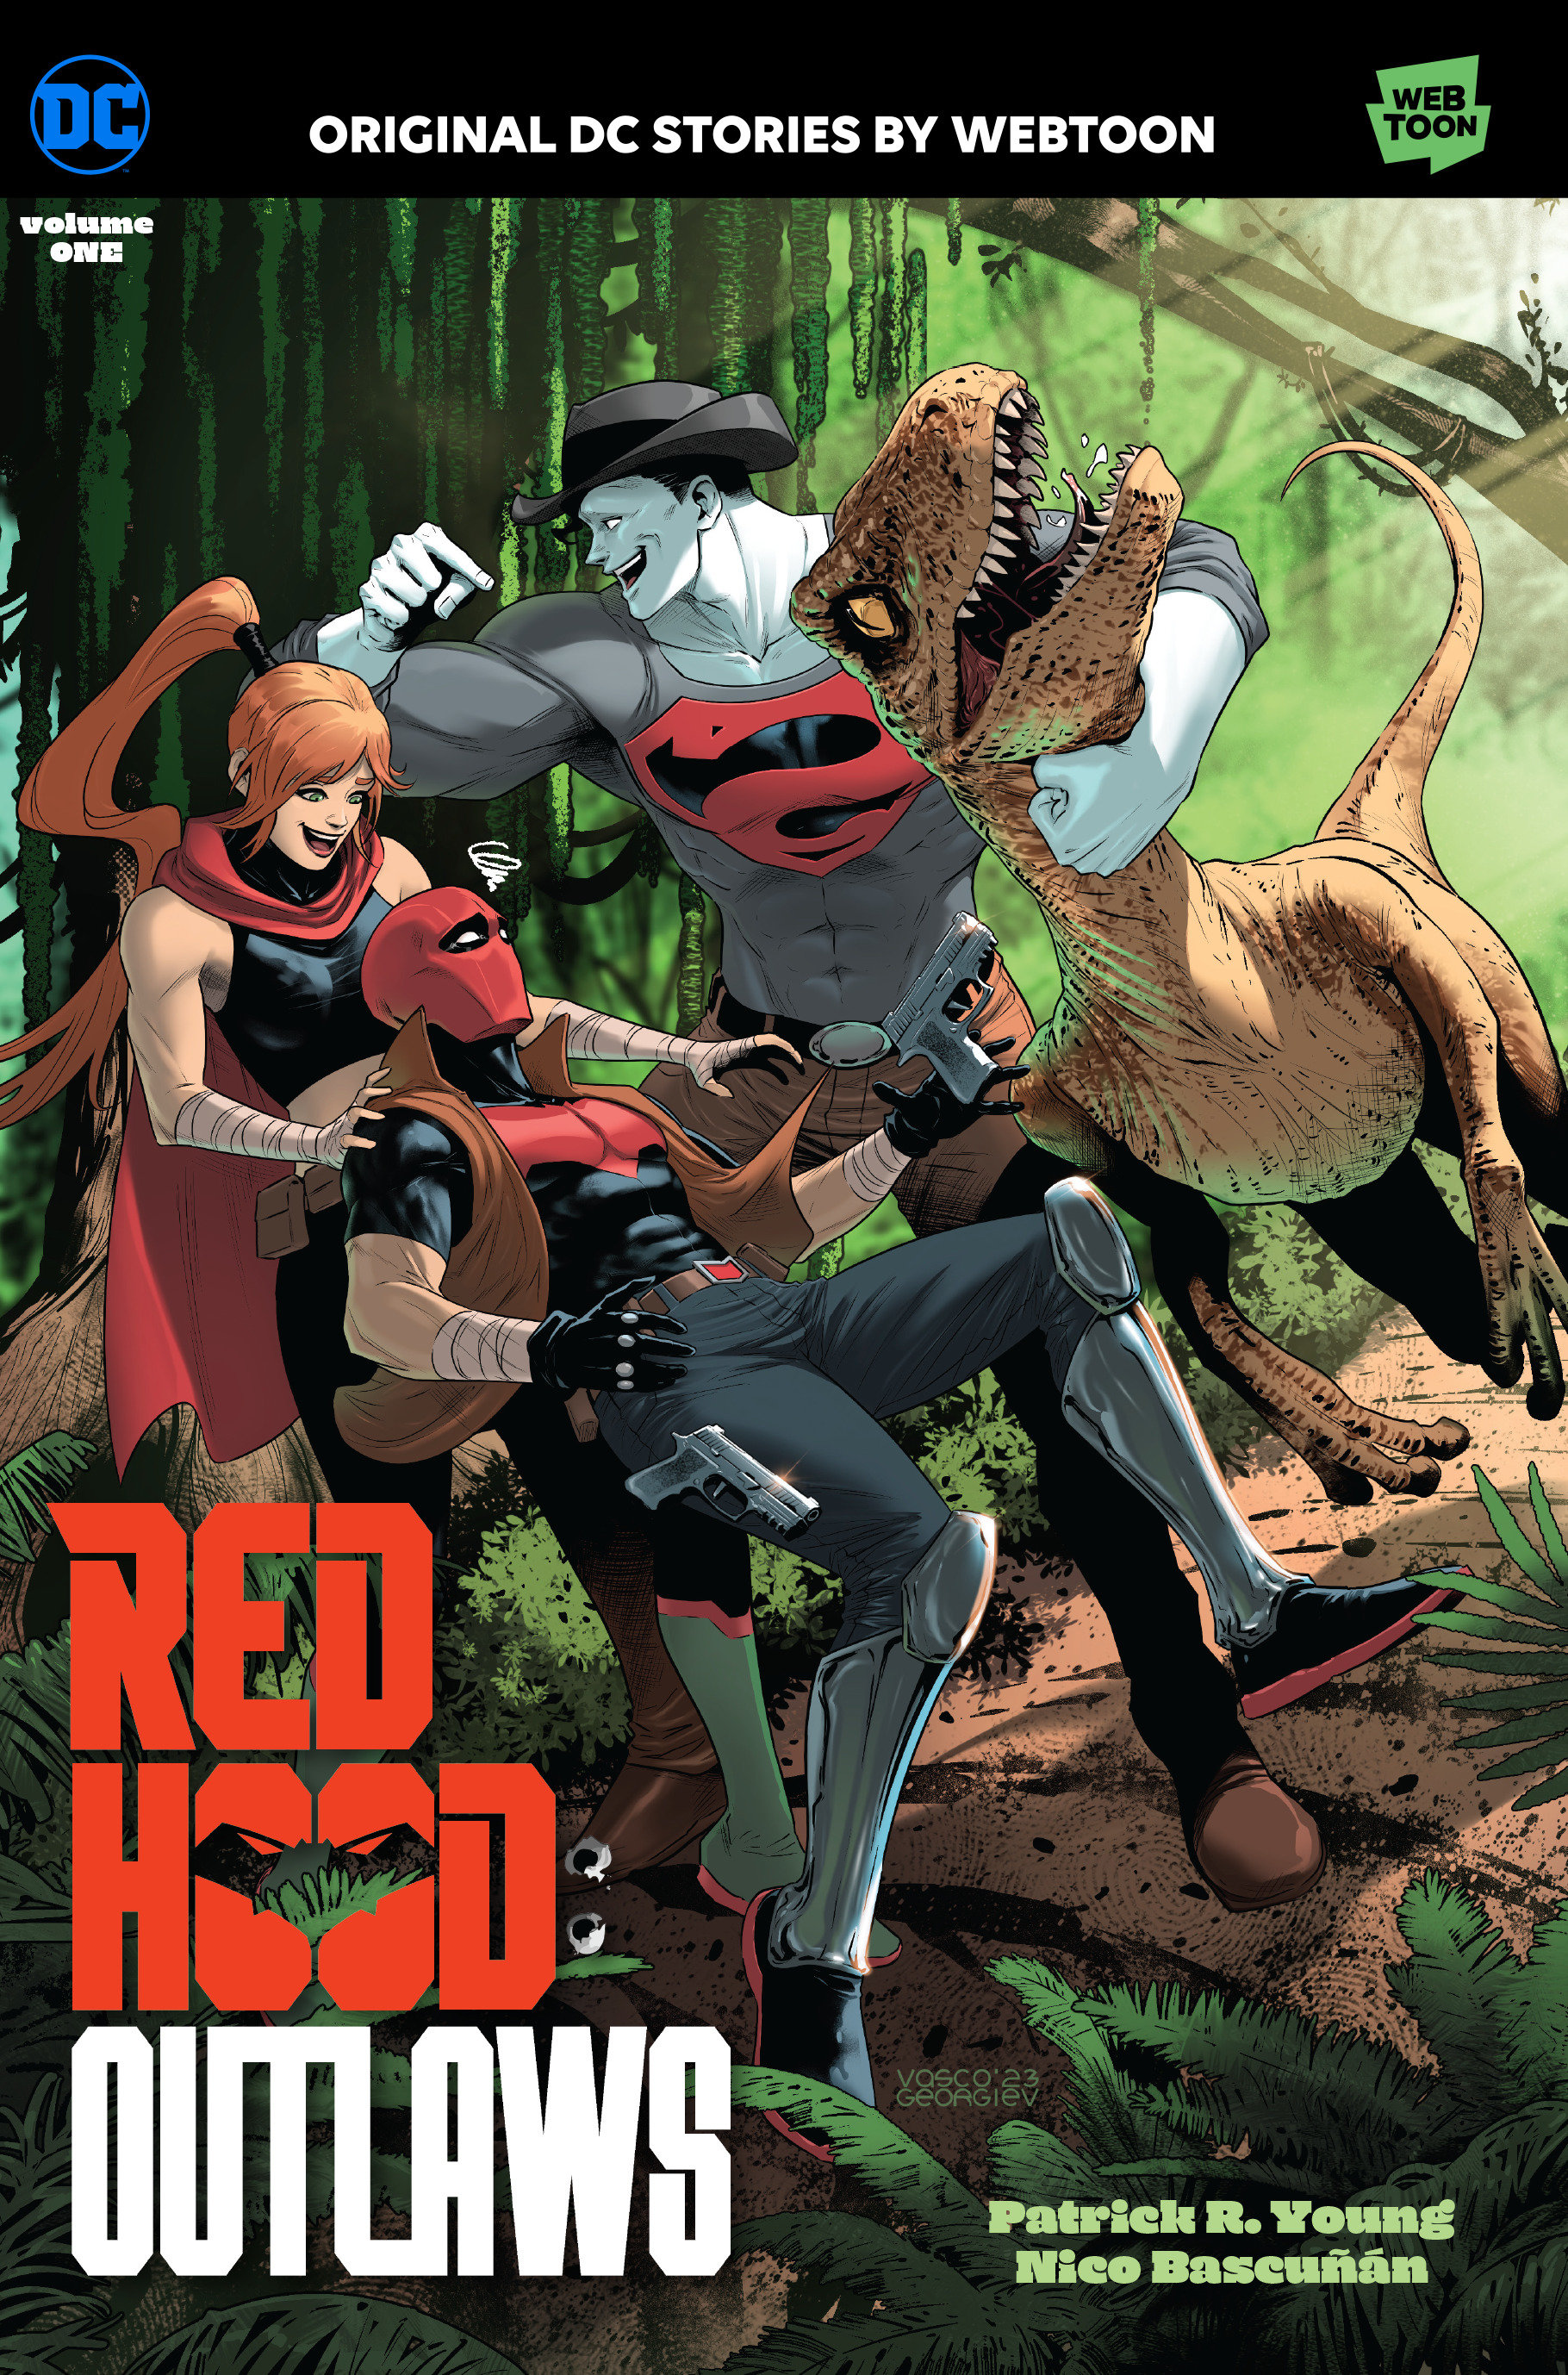 Red Hood Outlaws Graphic Novel Volume 1